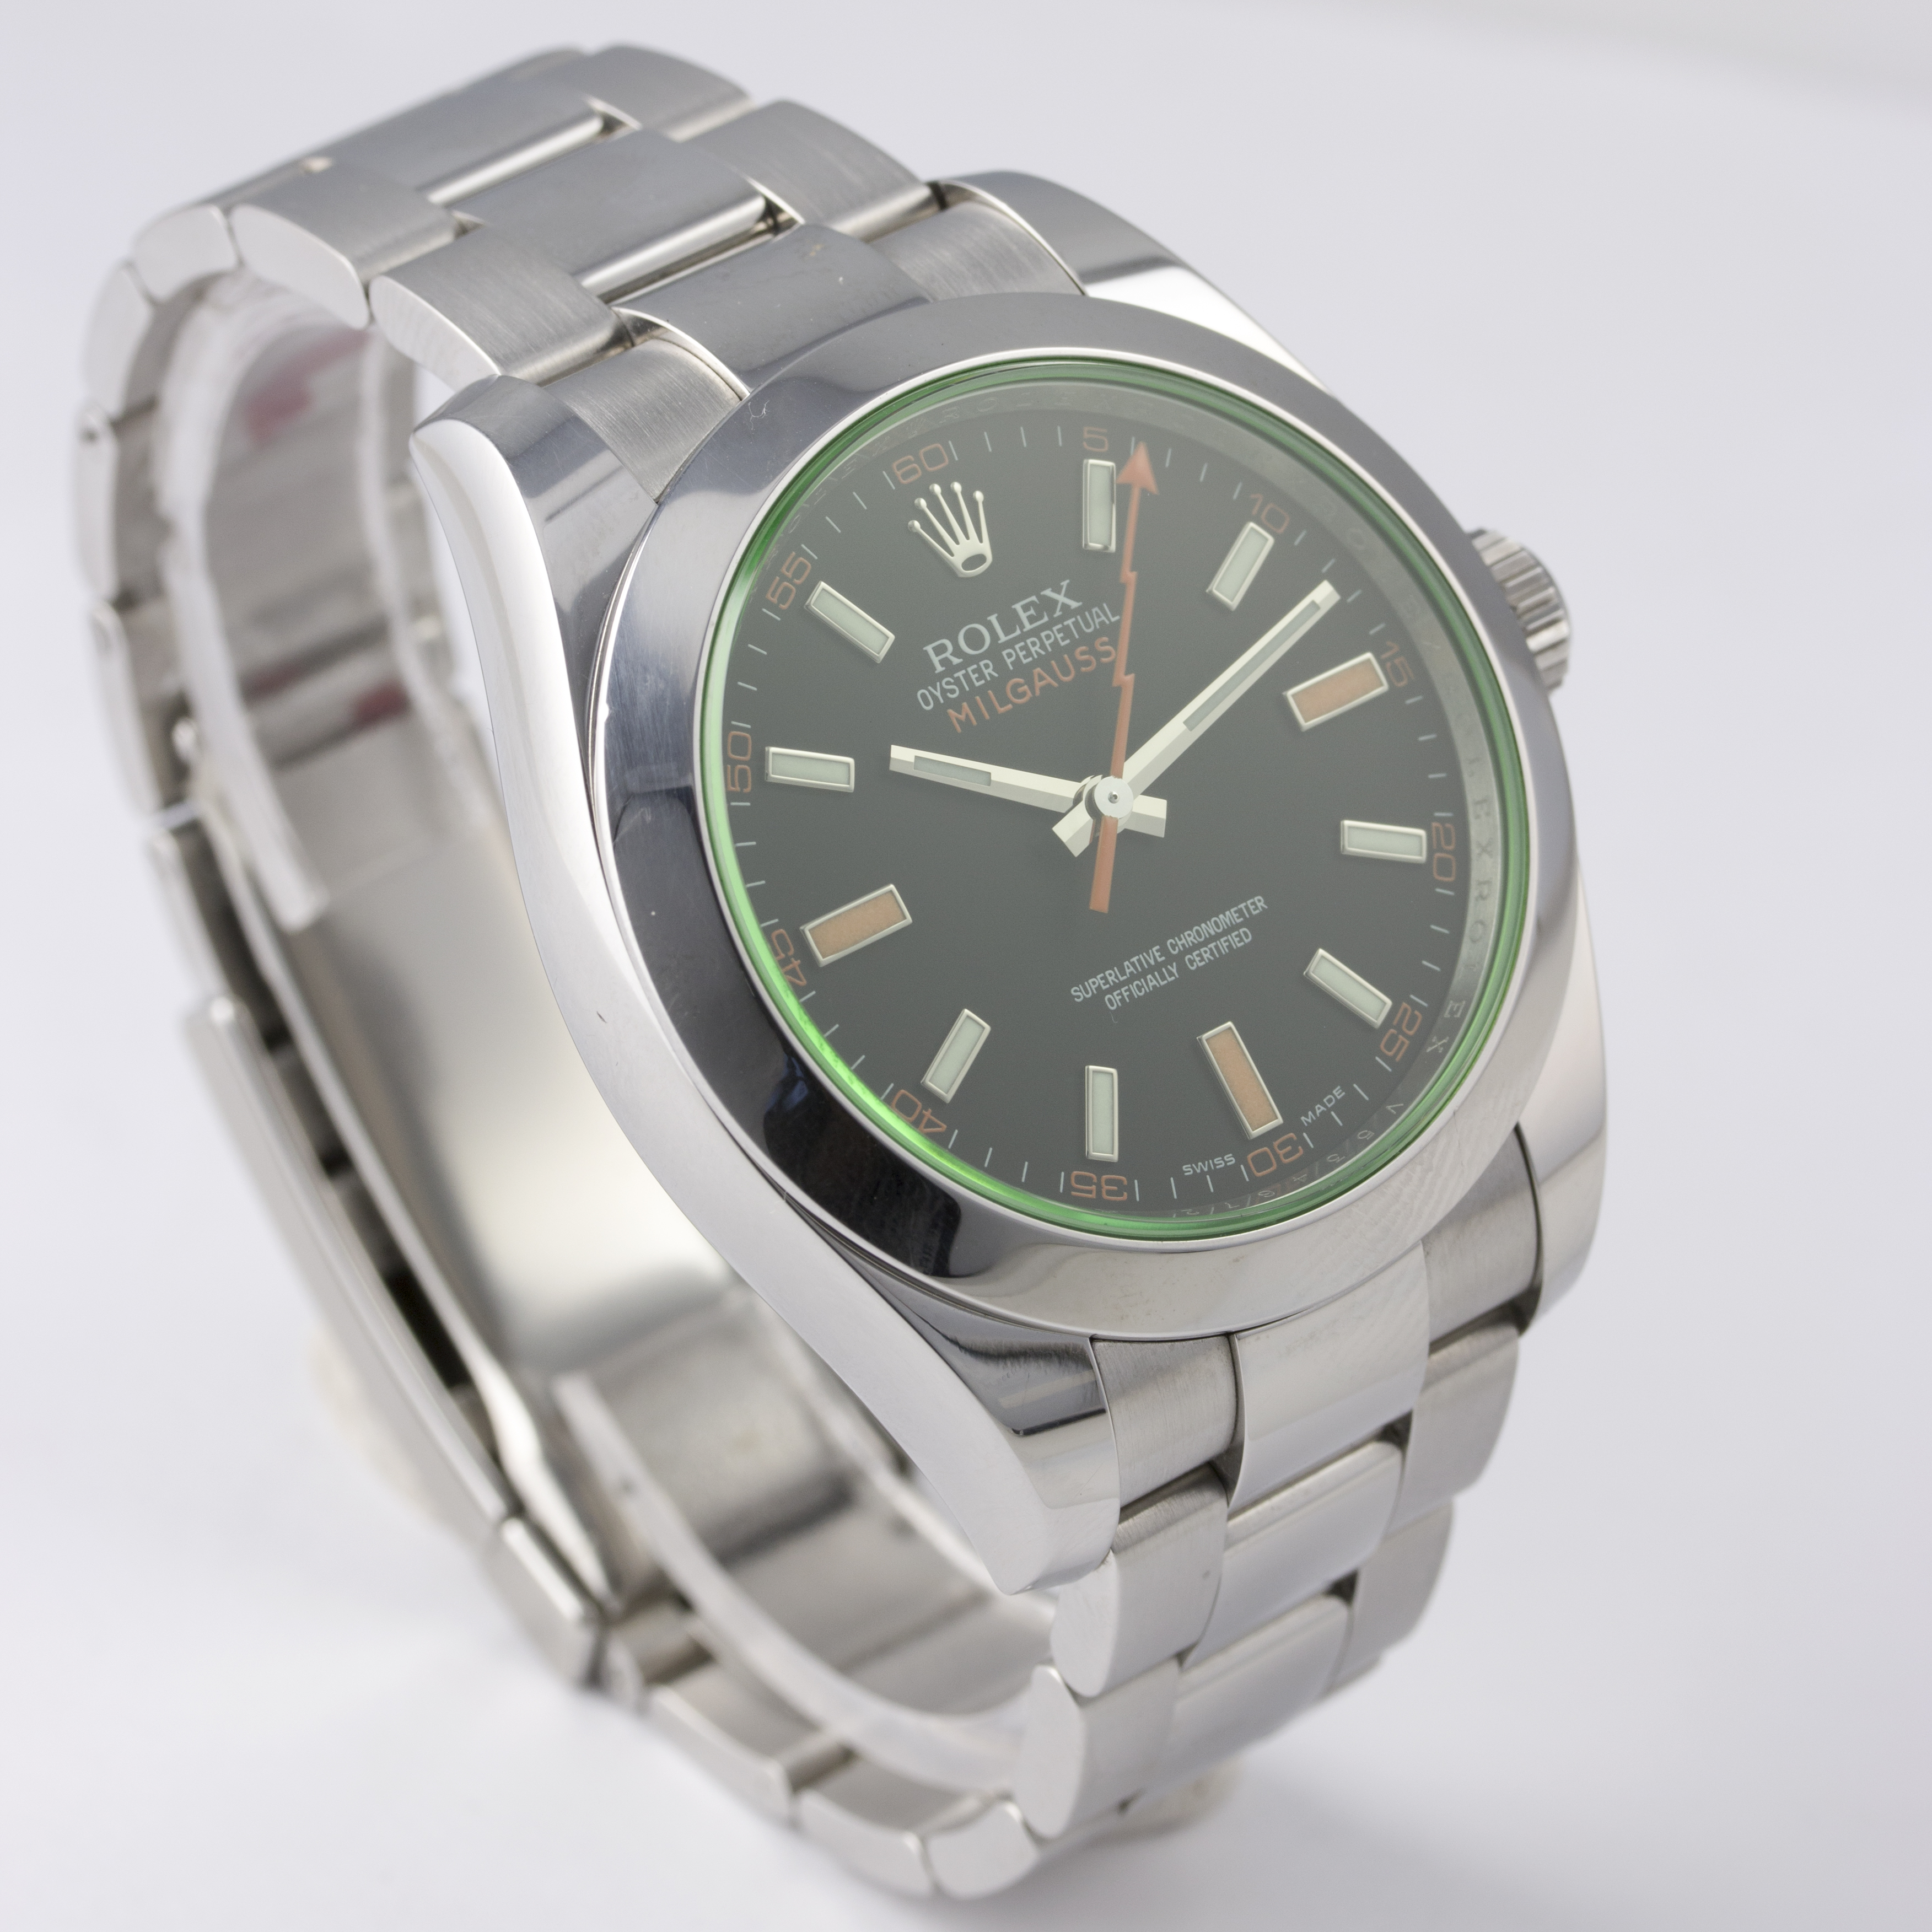 A GENTLEMAN'S STAINLESS STEEL ROLEX OYSTER PERPETUAL "GREEN GLASS" MILGAUSS BRACELET WATCH DATED - Image 4 of 6